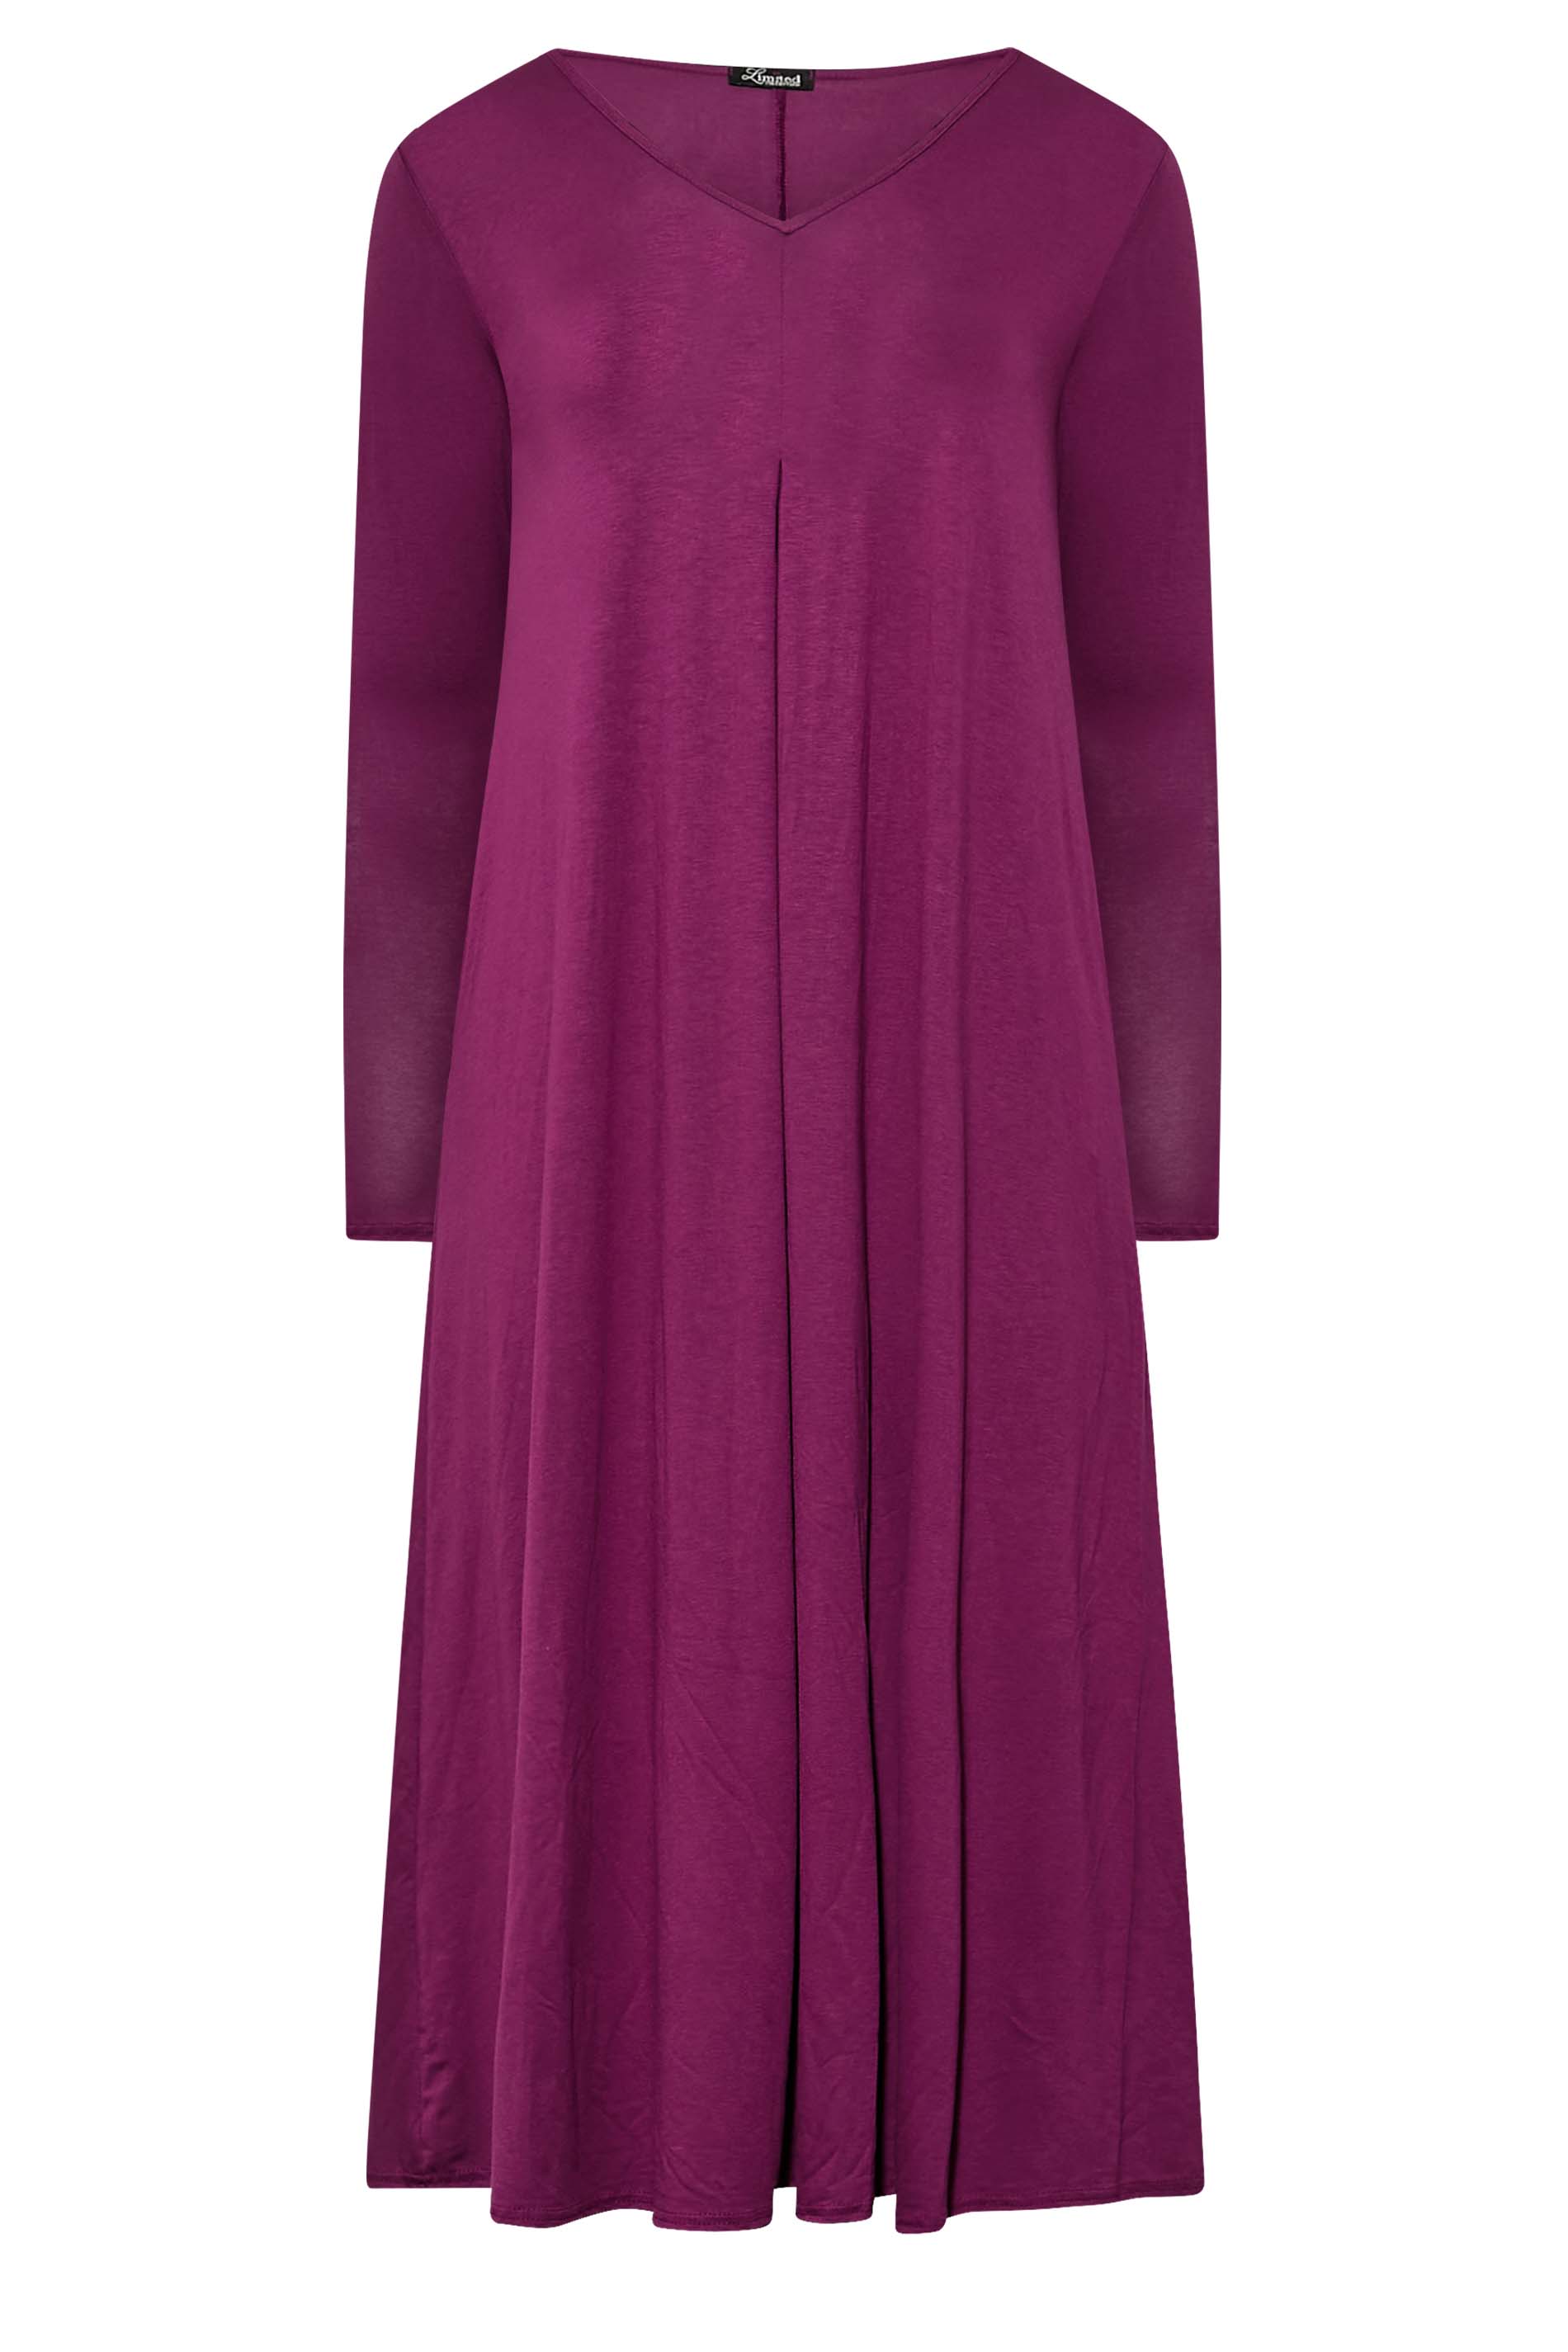 Limited Collection Plus Size Purple Pleat Front Dress Yours Clothing 